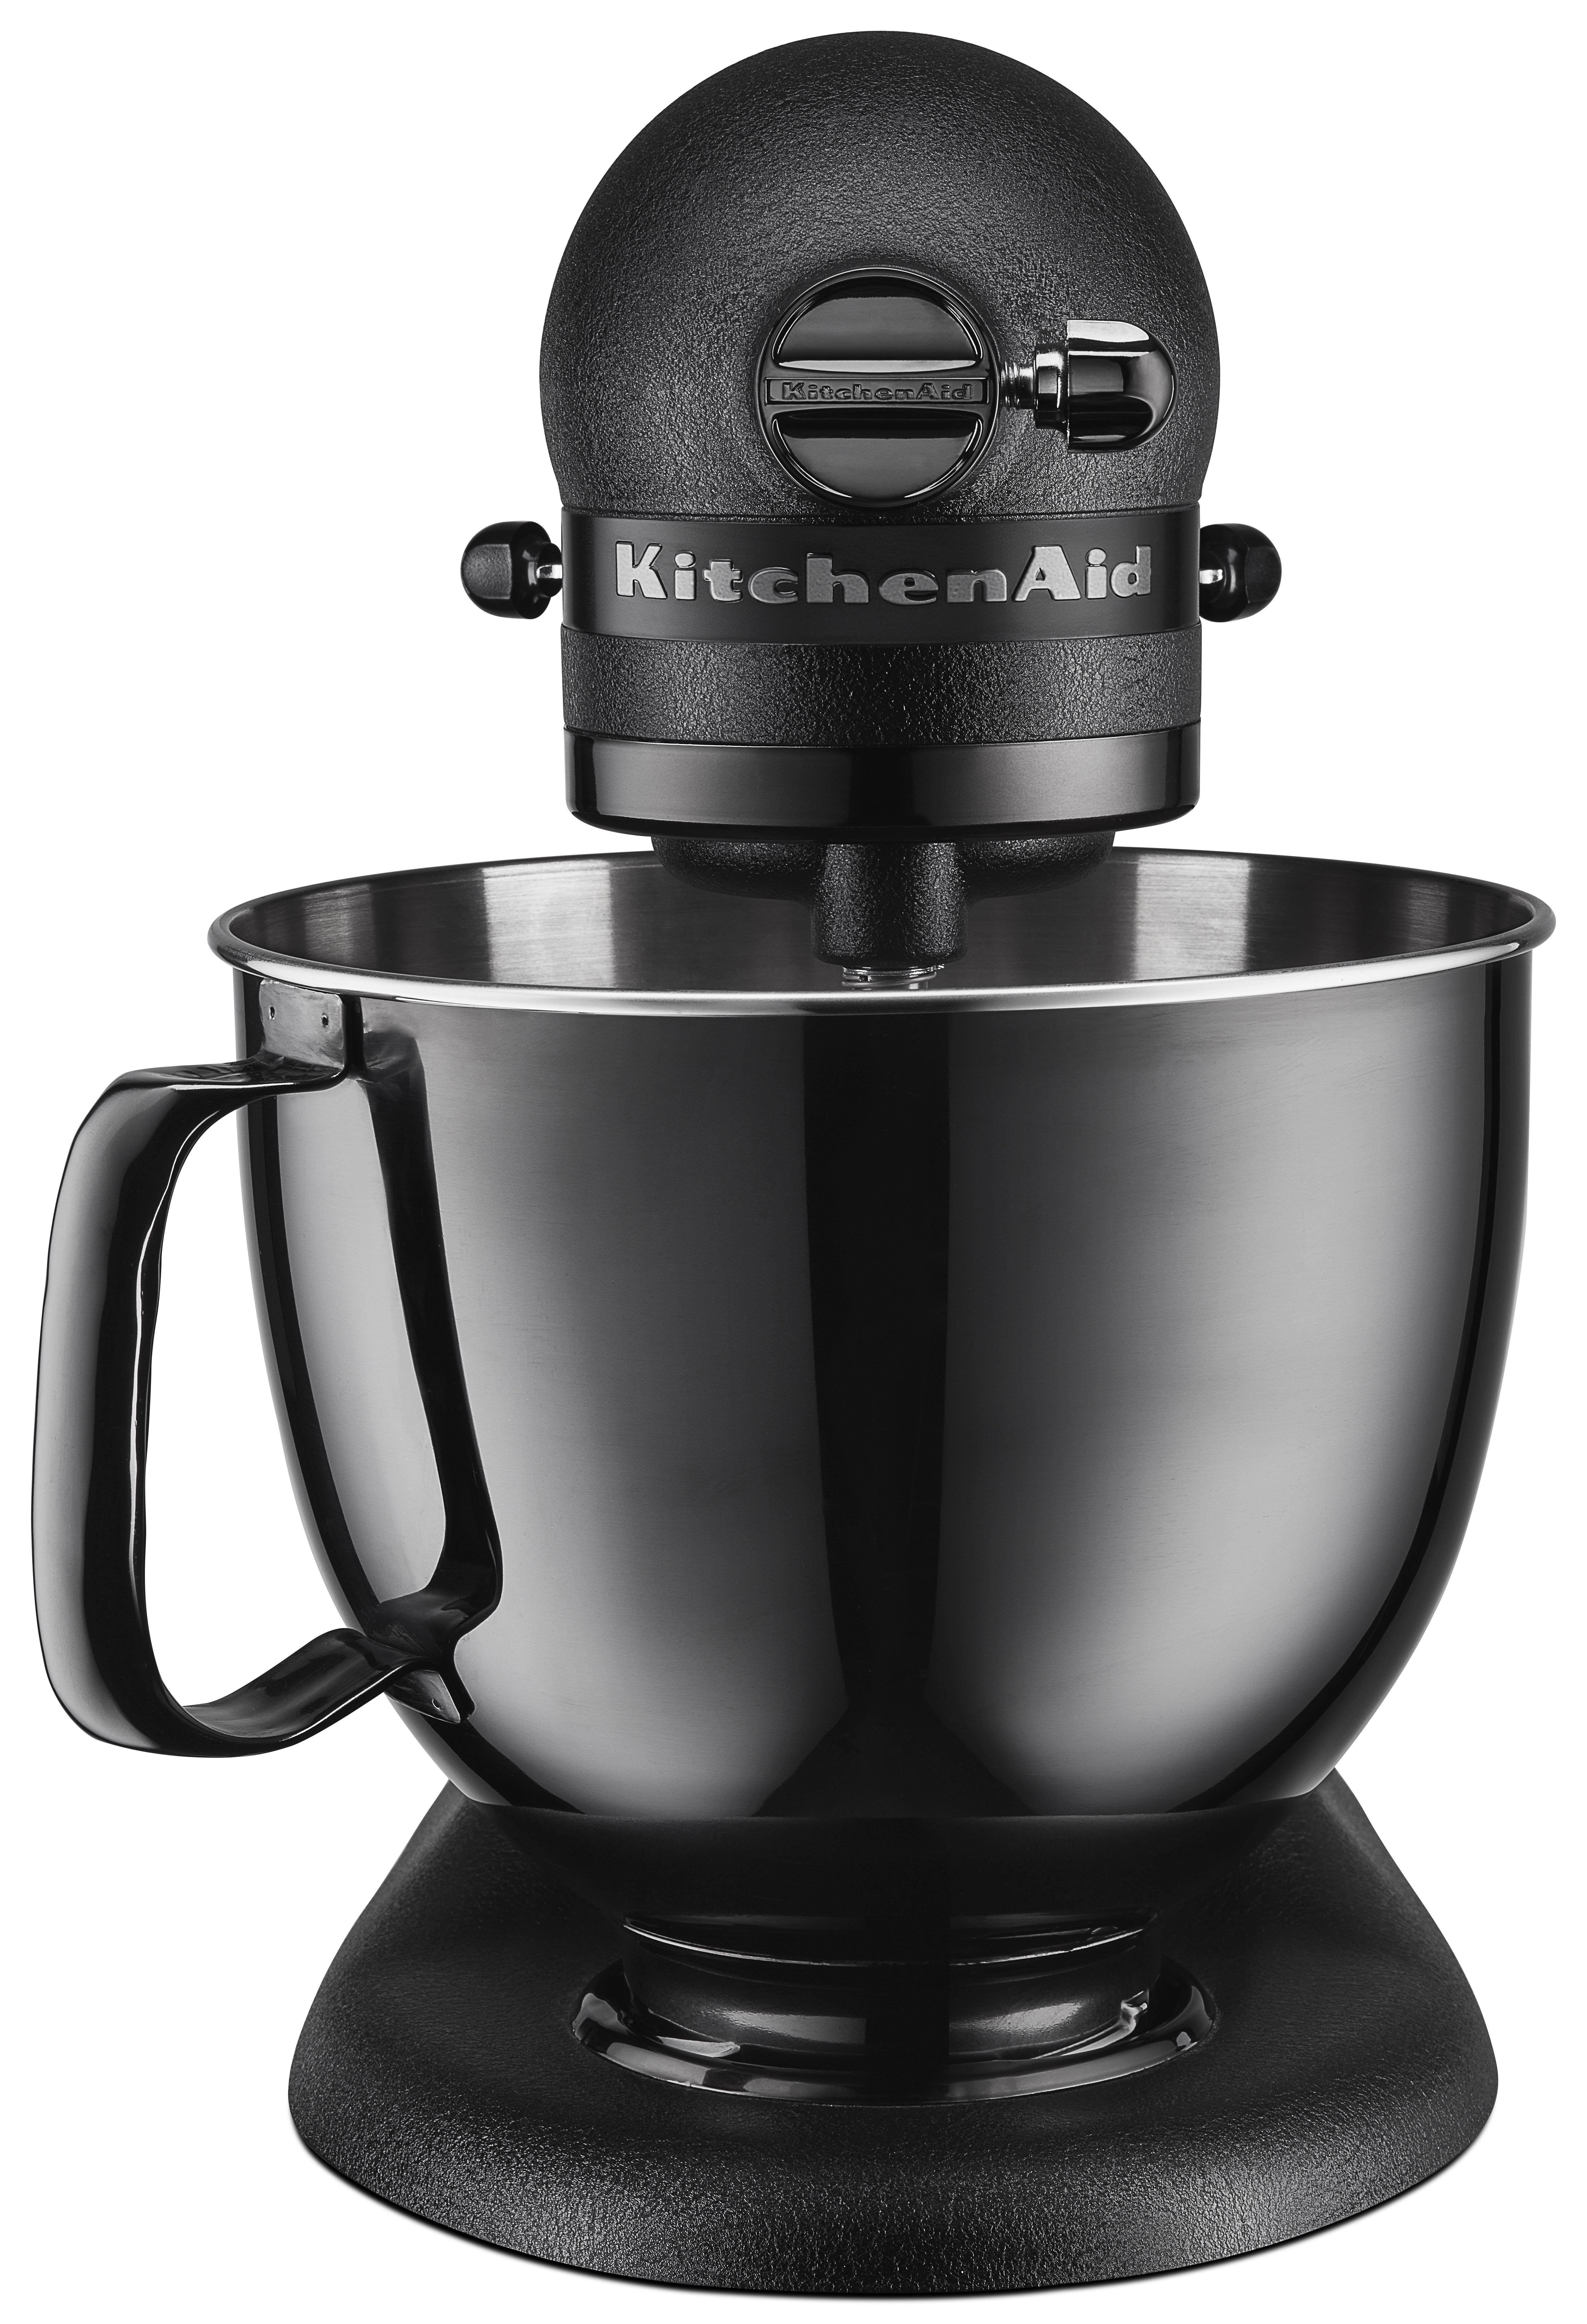 KITCHENAID INTRODUCES LIMITED EDITION ARTISAN BLACK TIE STAND